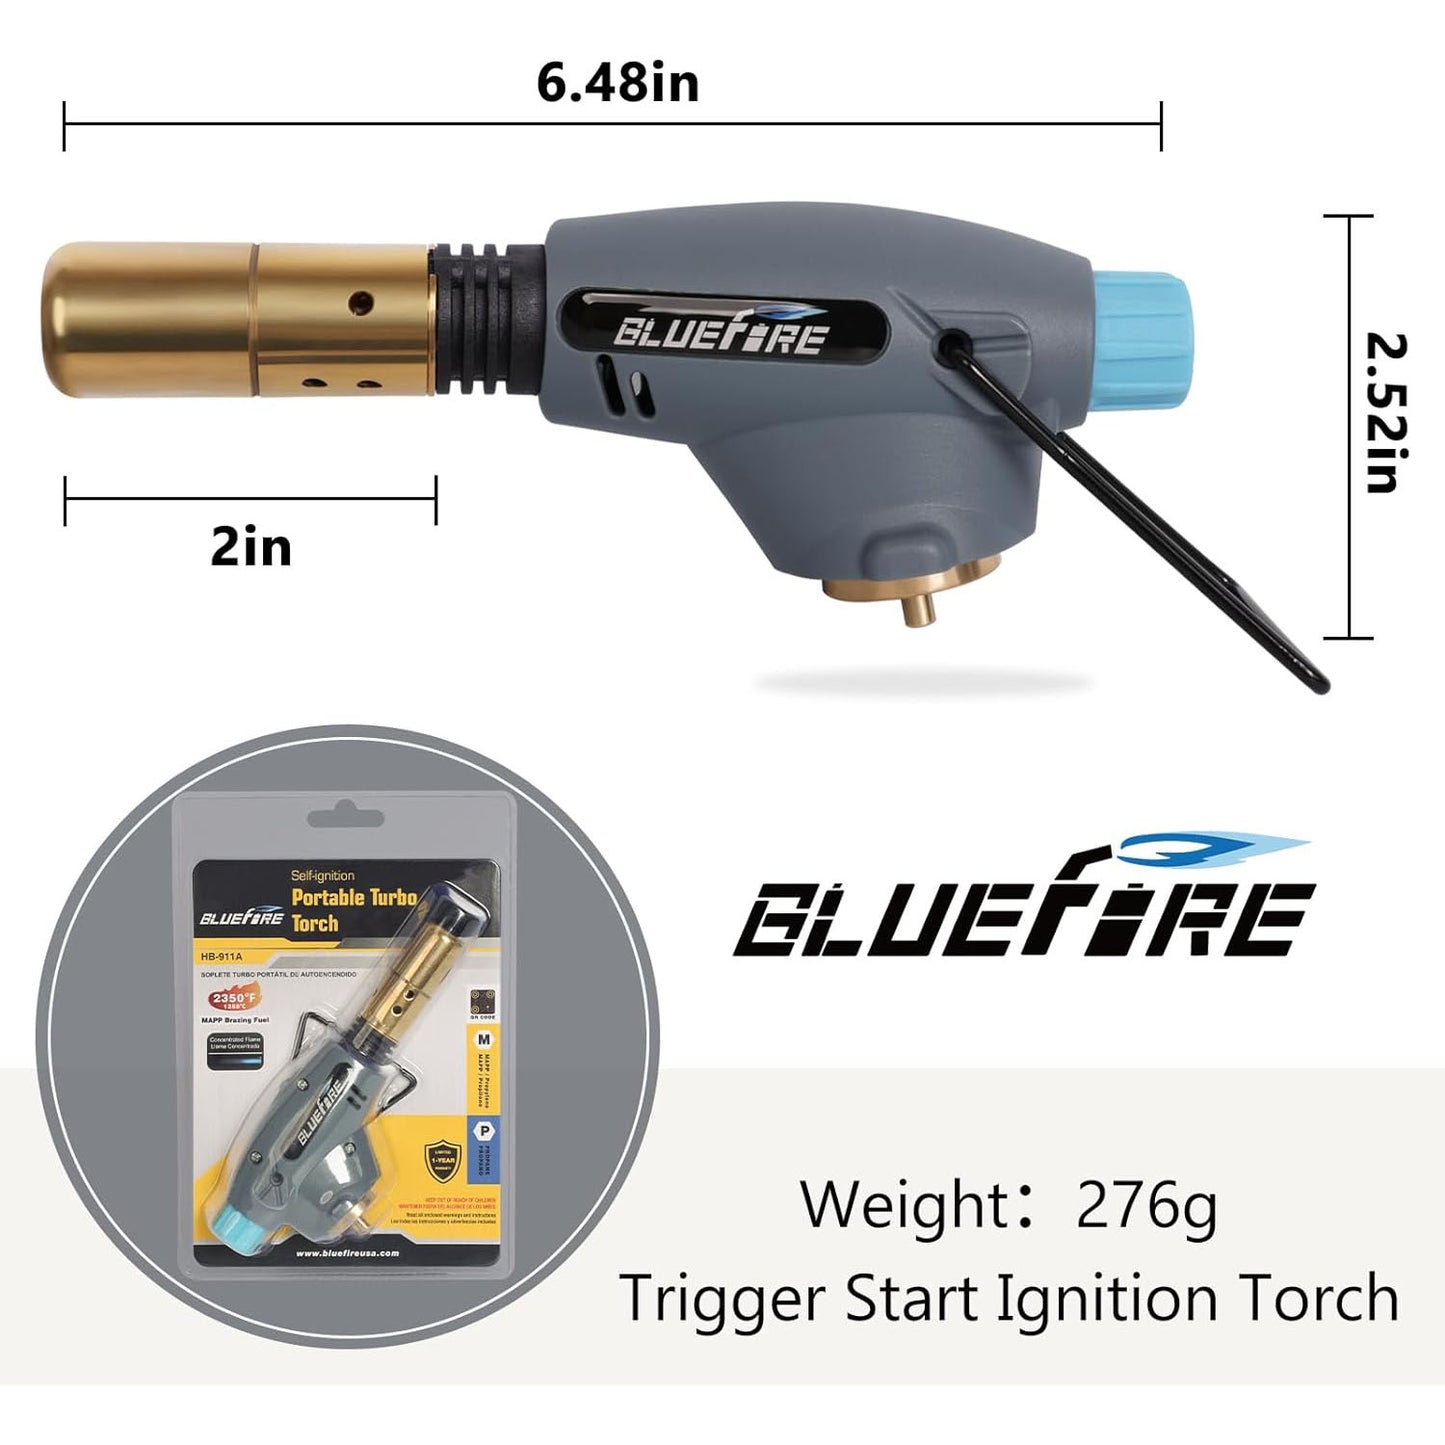 BLUEFIRE Handy Cyclone Torch Head Portable Brass Gas Torch Trigger Start Self-Ignition Nozzle Torch Fuel by MAPP MAP PRO Propane Gas Cylinder for Soldering Welding Plumbing Repair Lighting Glass DIY